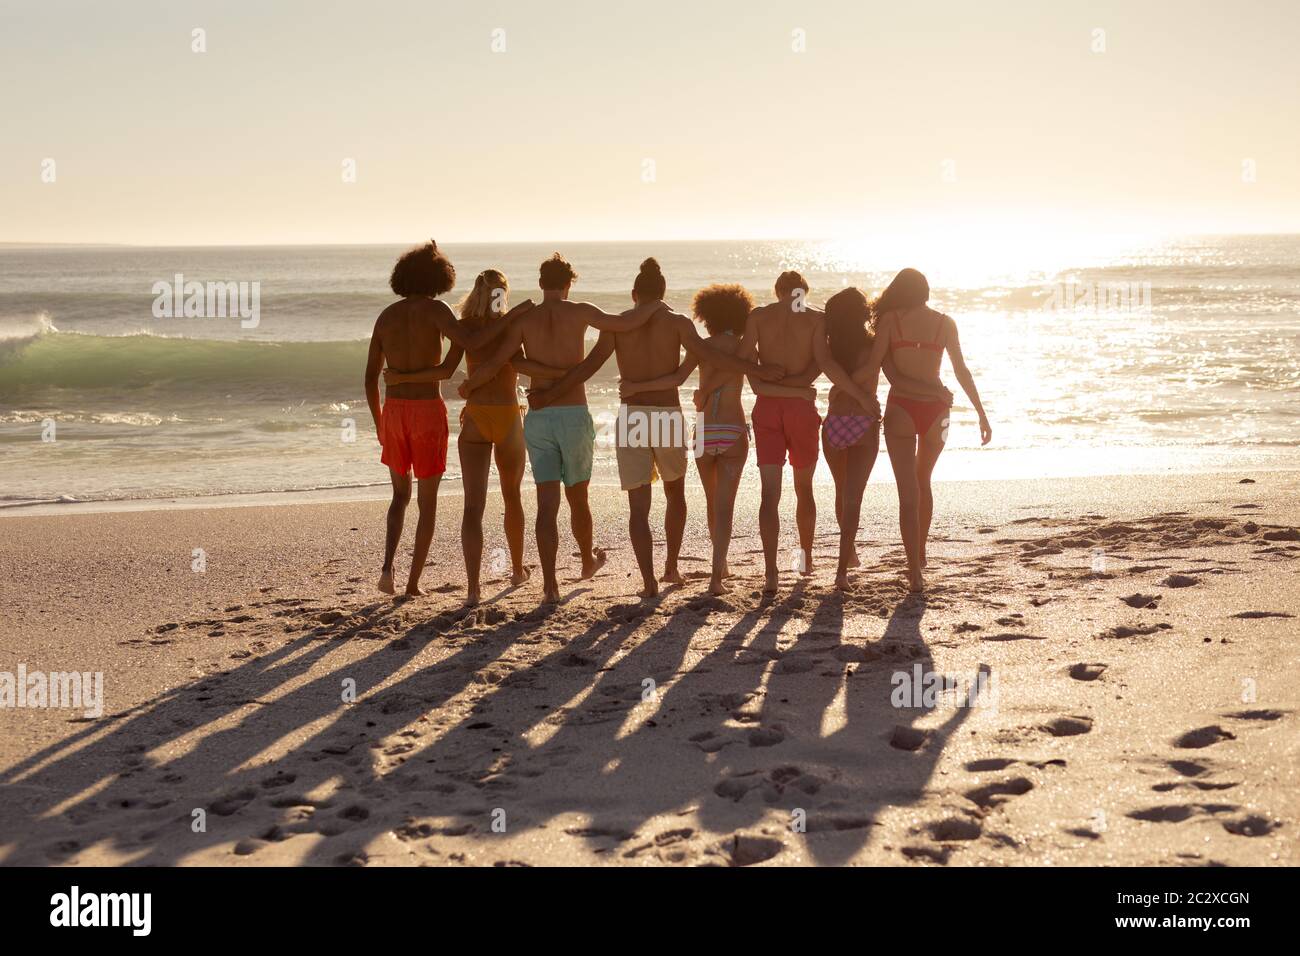 Multi-ethnic group of male and female standing on the beach Stock Photo